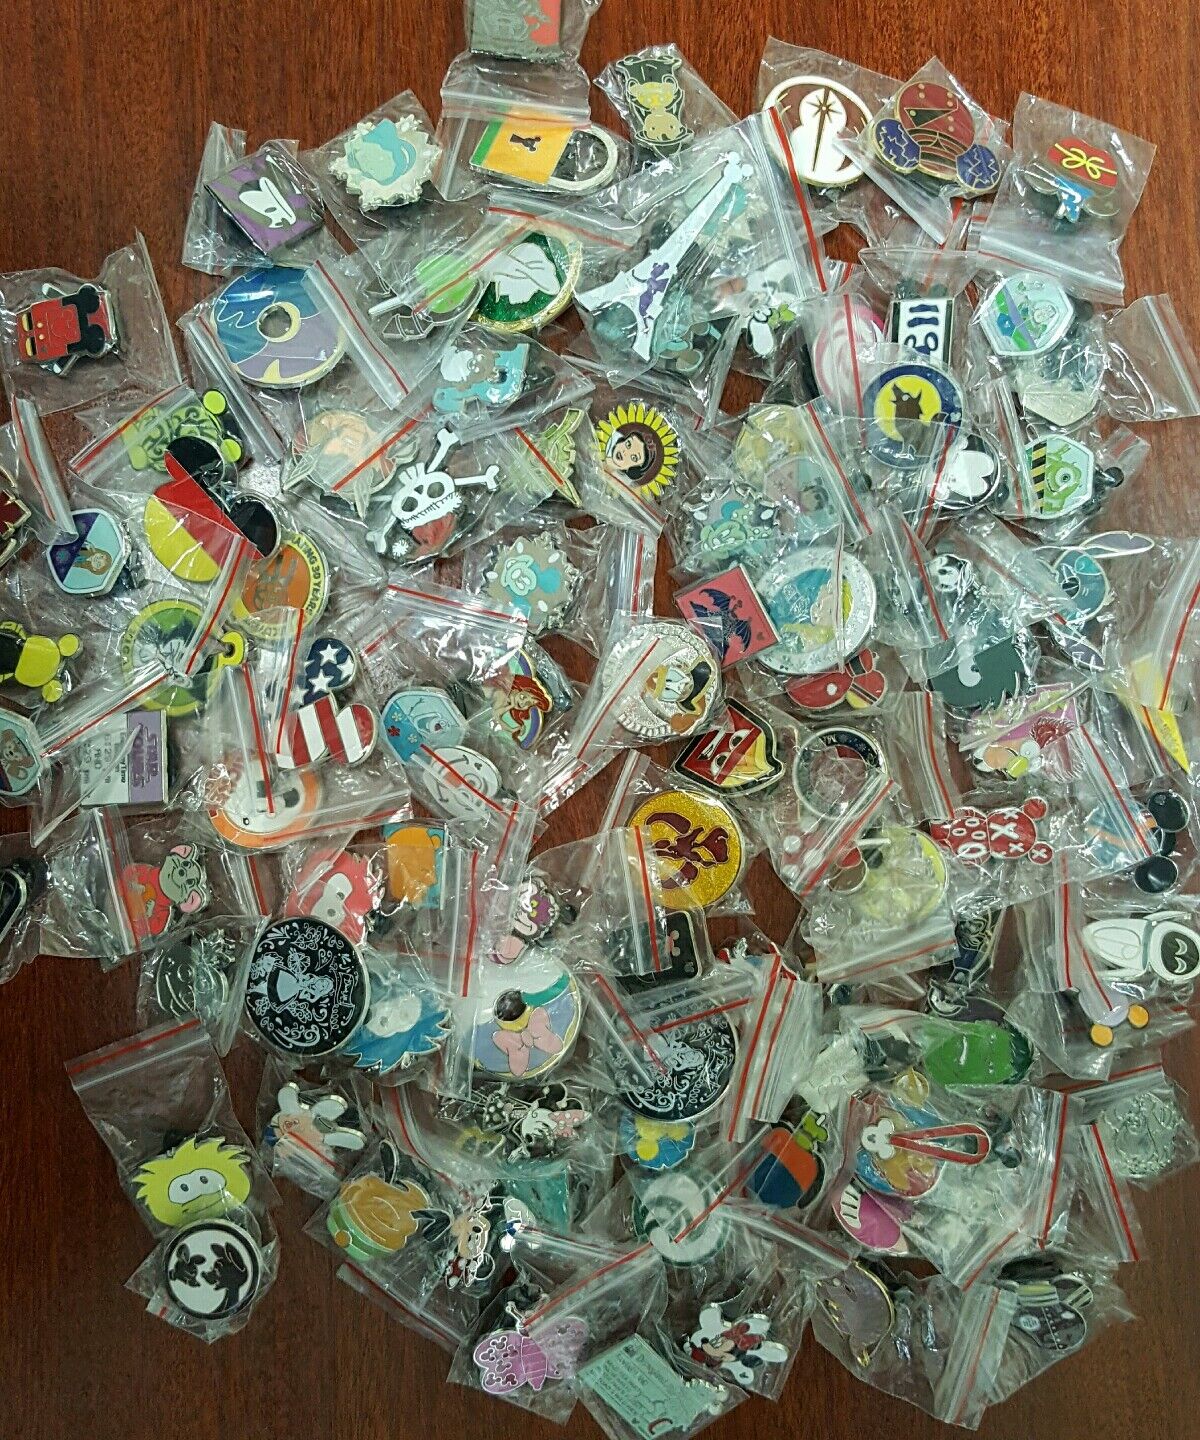 Disney Pins lot of 1500 1-3 Day  US Seller 100% Tradable